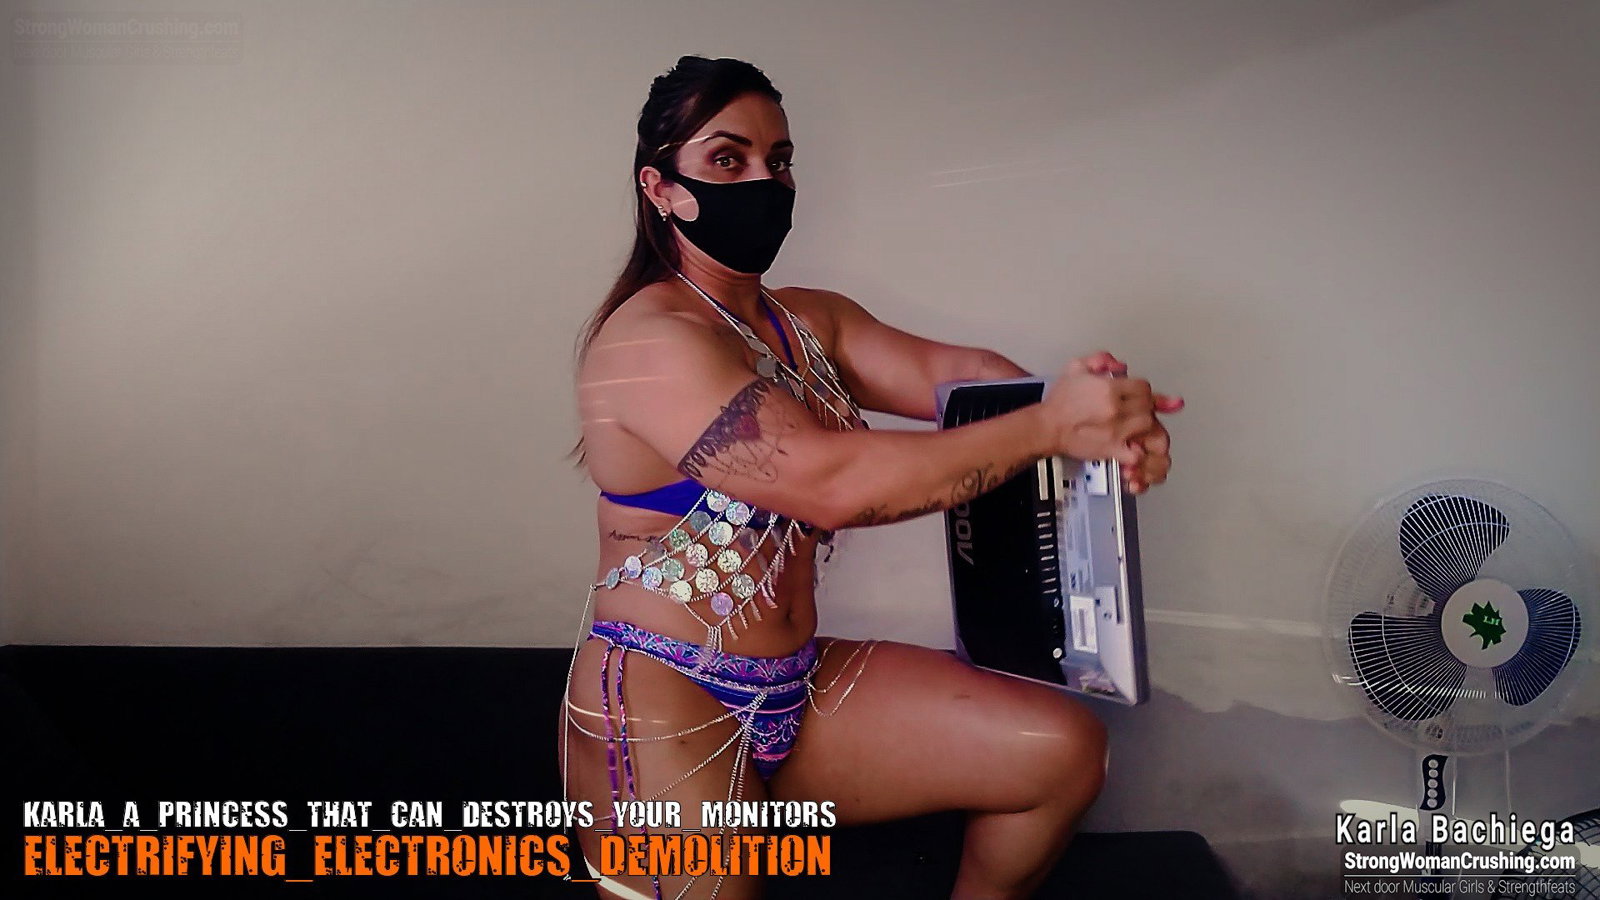 Watch the Photo by MusclegirlStrength with the username @MusclegirlStrength, who is a brand user, posted on August 25, 2023 and the text says '👑 Check out Karla, the princess with the power to crush your monitors! 🤩 Get a membership to watch the video now at https://www.strongwomancrushing.com/ 🤩 #karla #princesspower #monitorcrushing #strongwoman #crushingit'